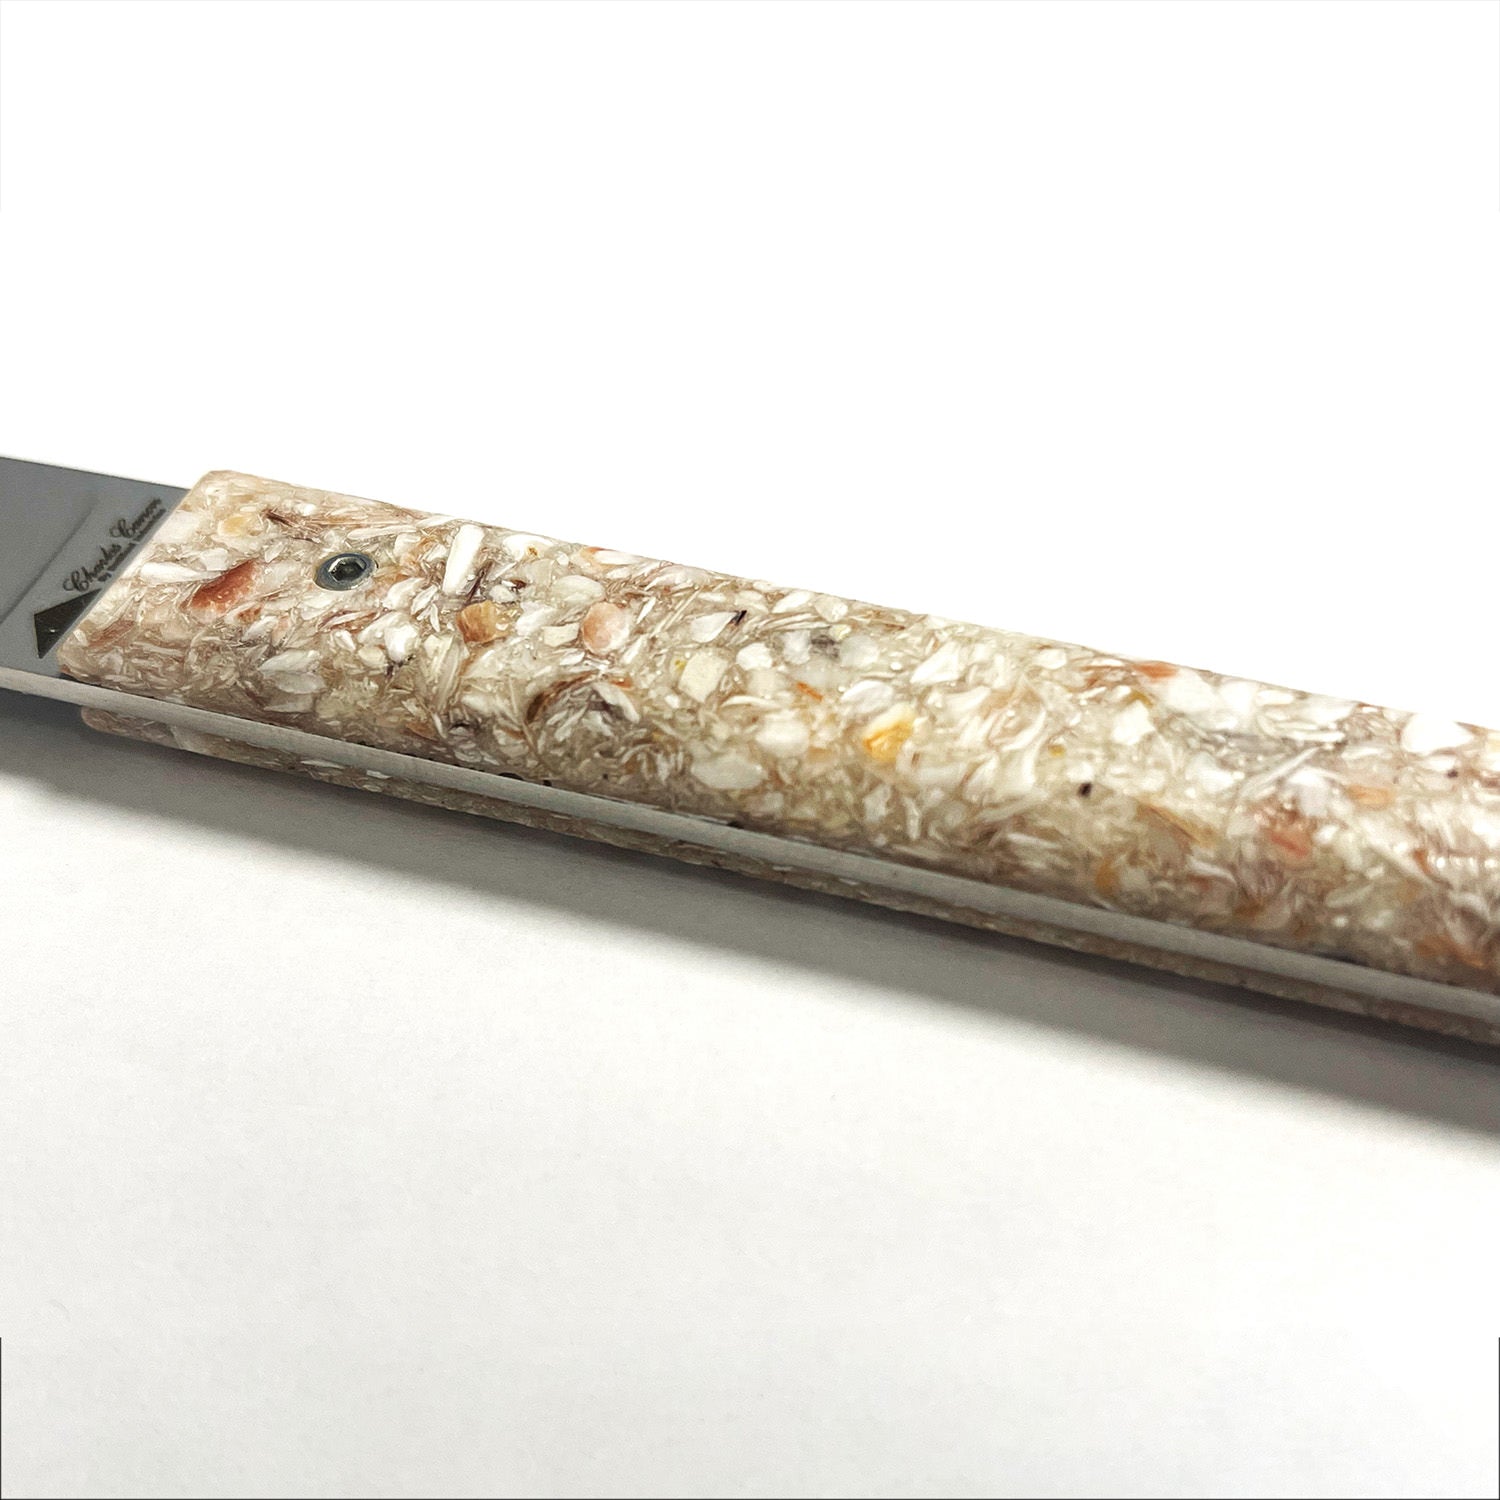 Oyster knife with a scallop shell handle